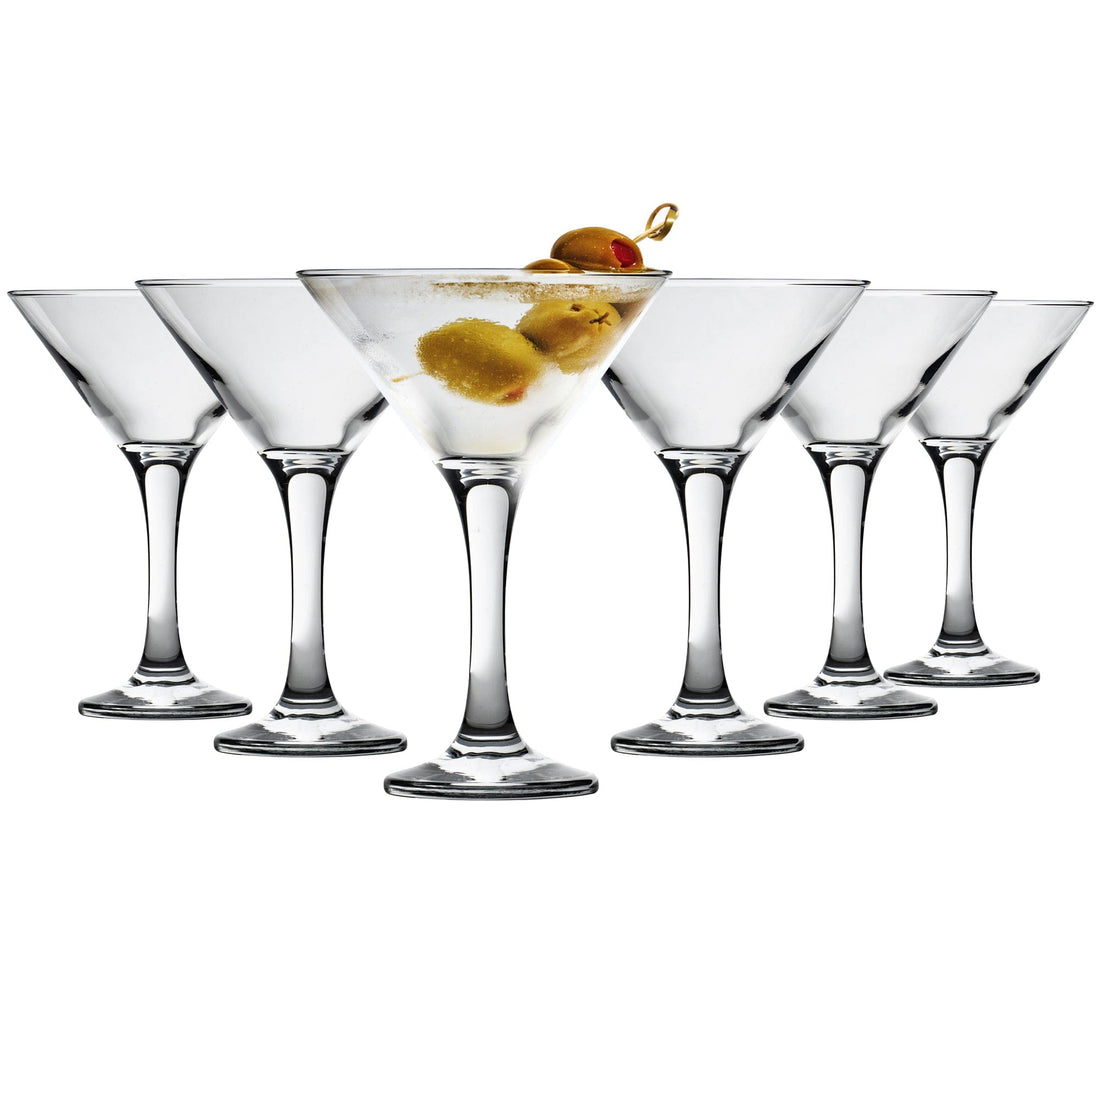 Rink Drink Martini Glasses - 175ml - Pack of 6